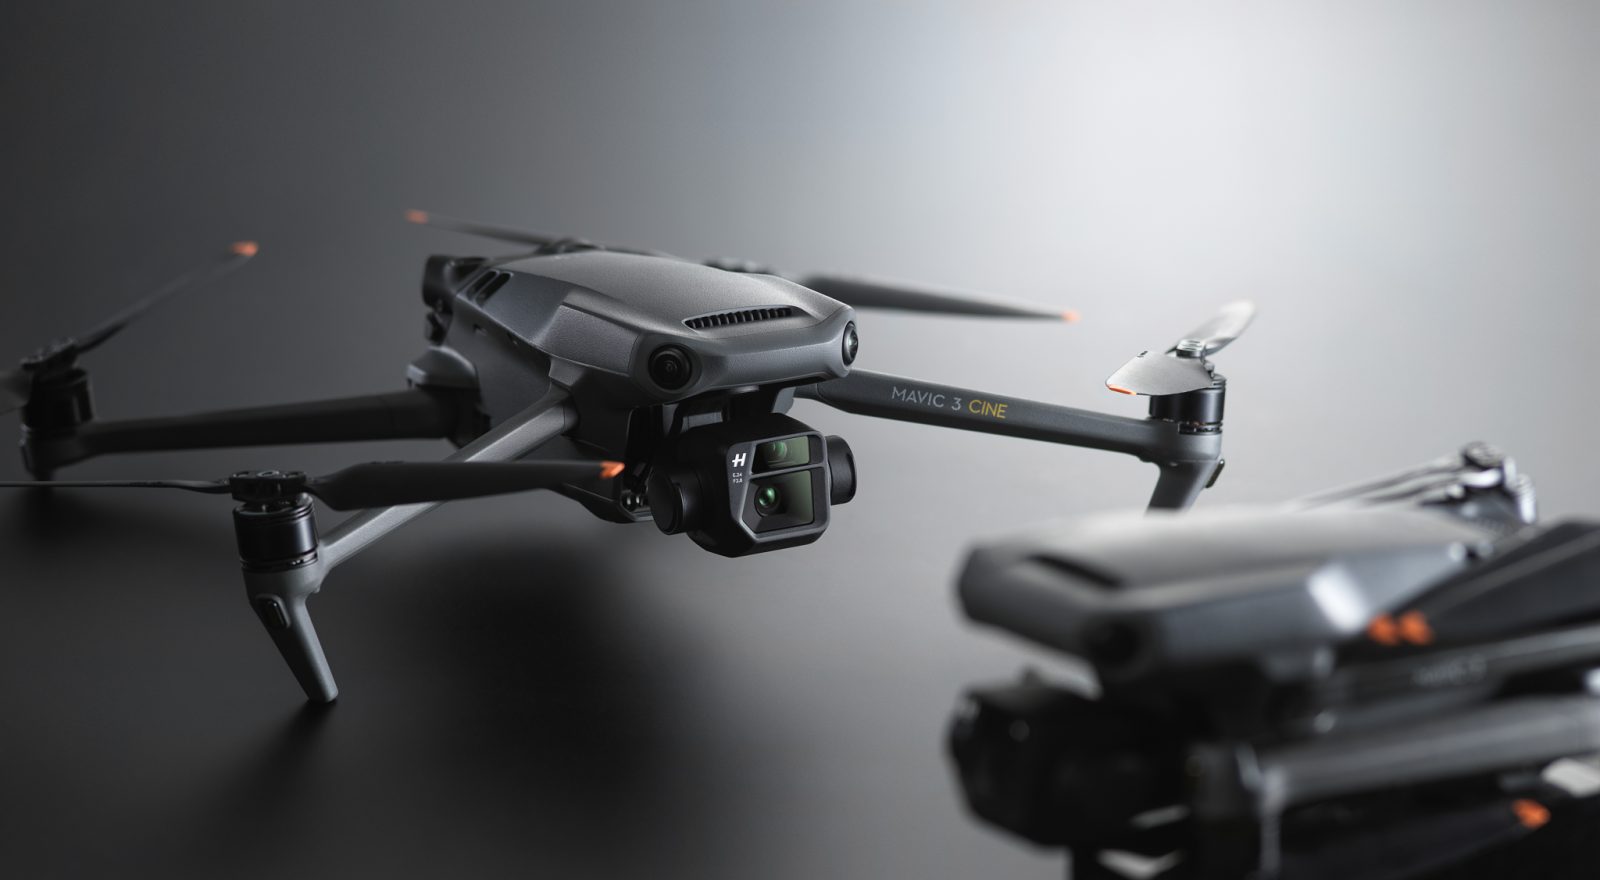 How update the firmware on your DJI 3 drone